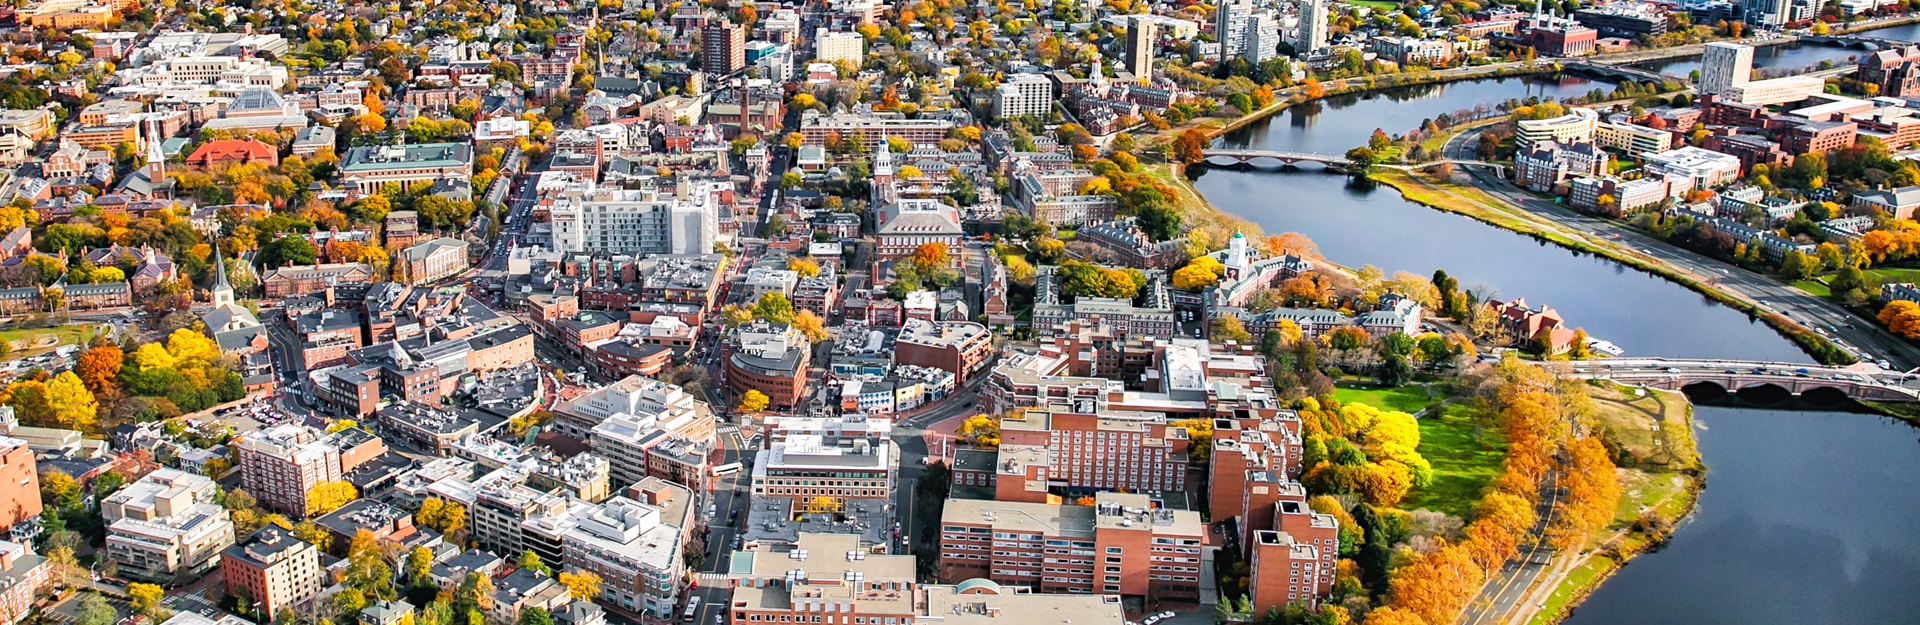 Aerial photo of the Harvard Square area